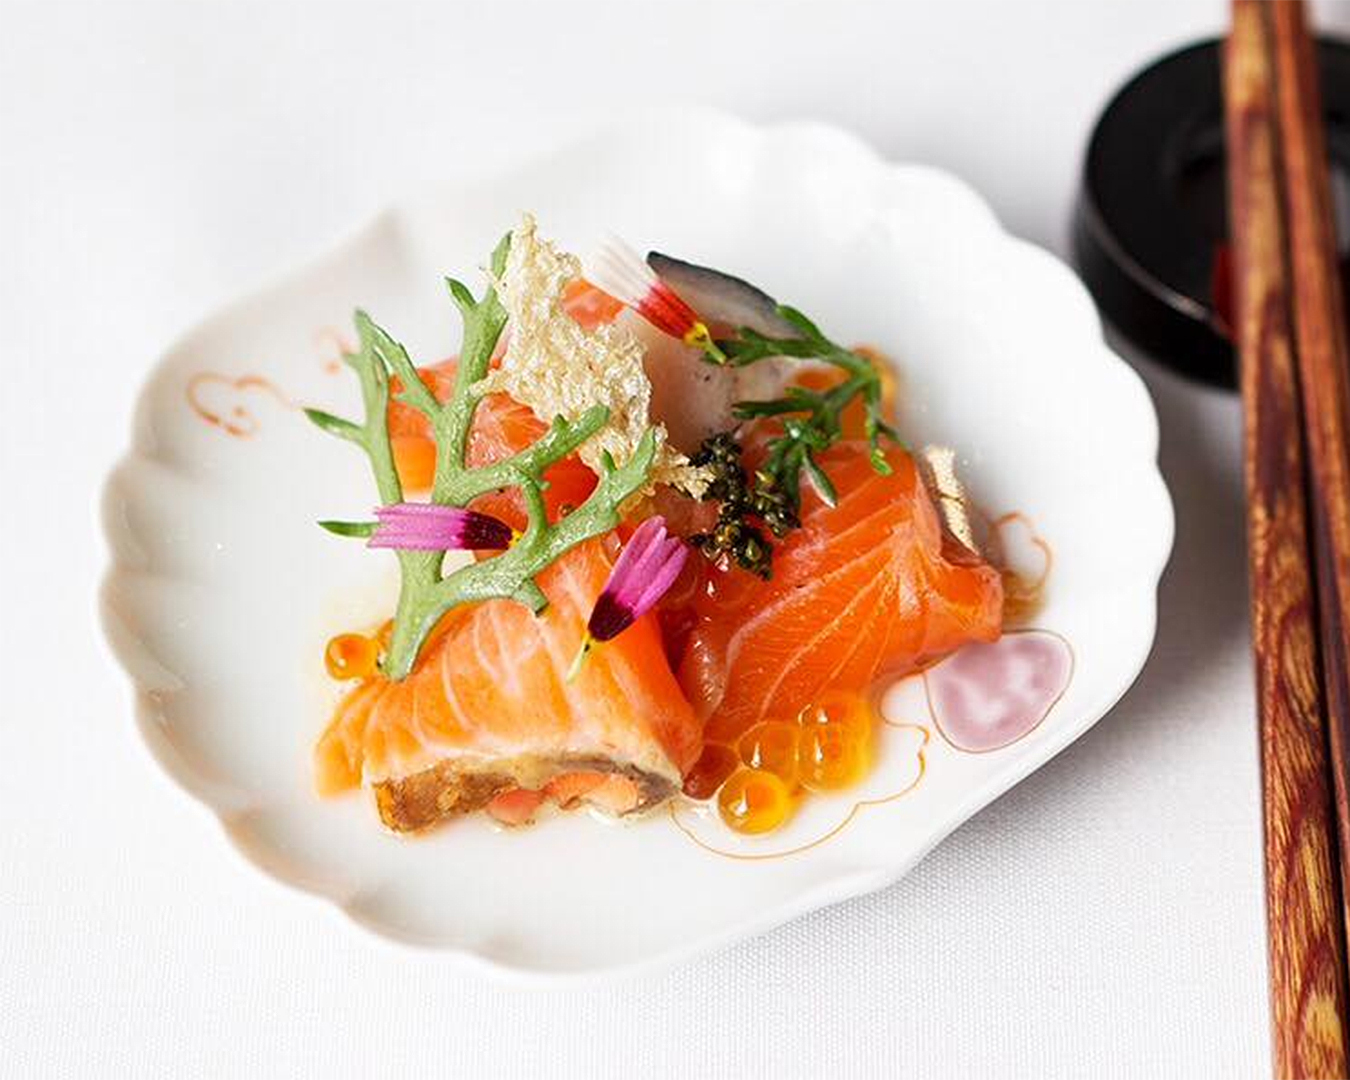 A sashimi dish sits on a white plate with chopsticks at the ready.